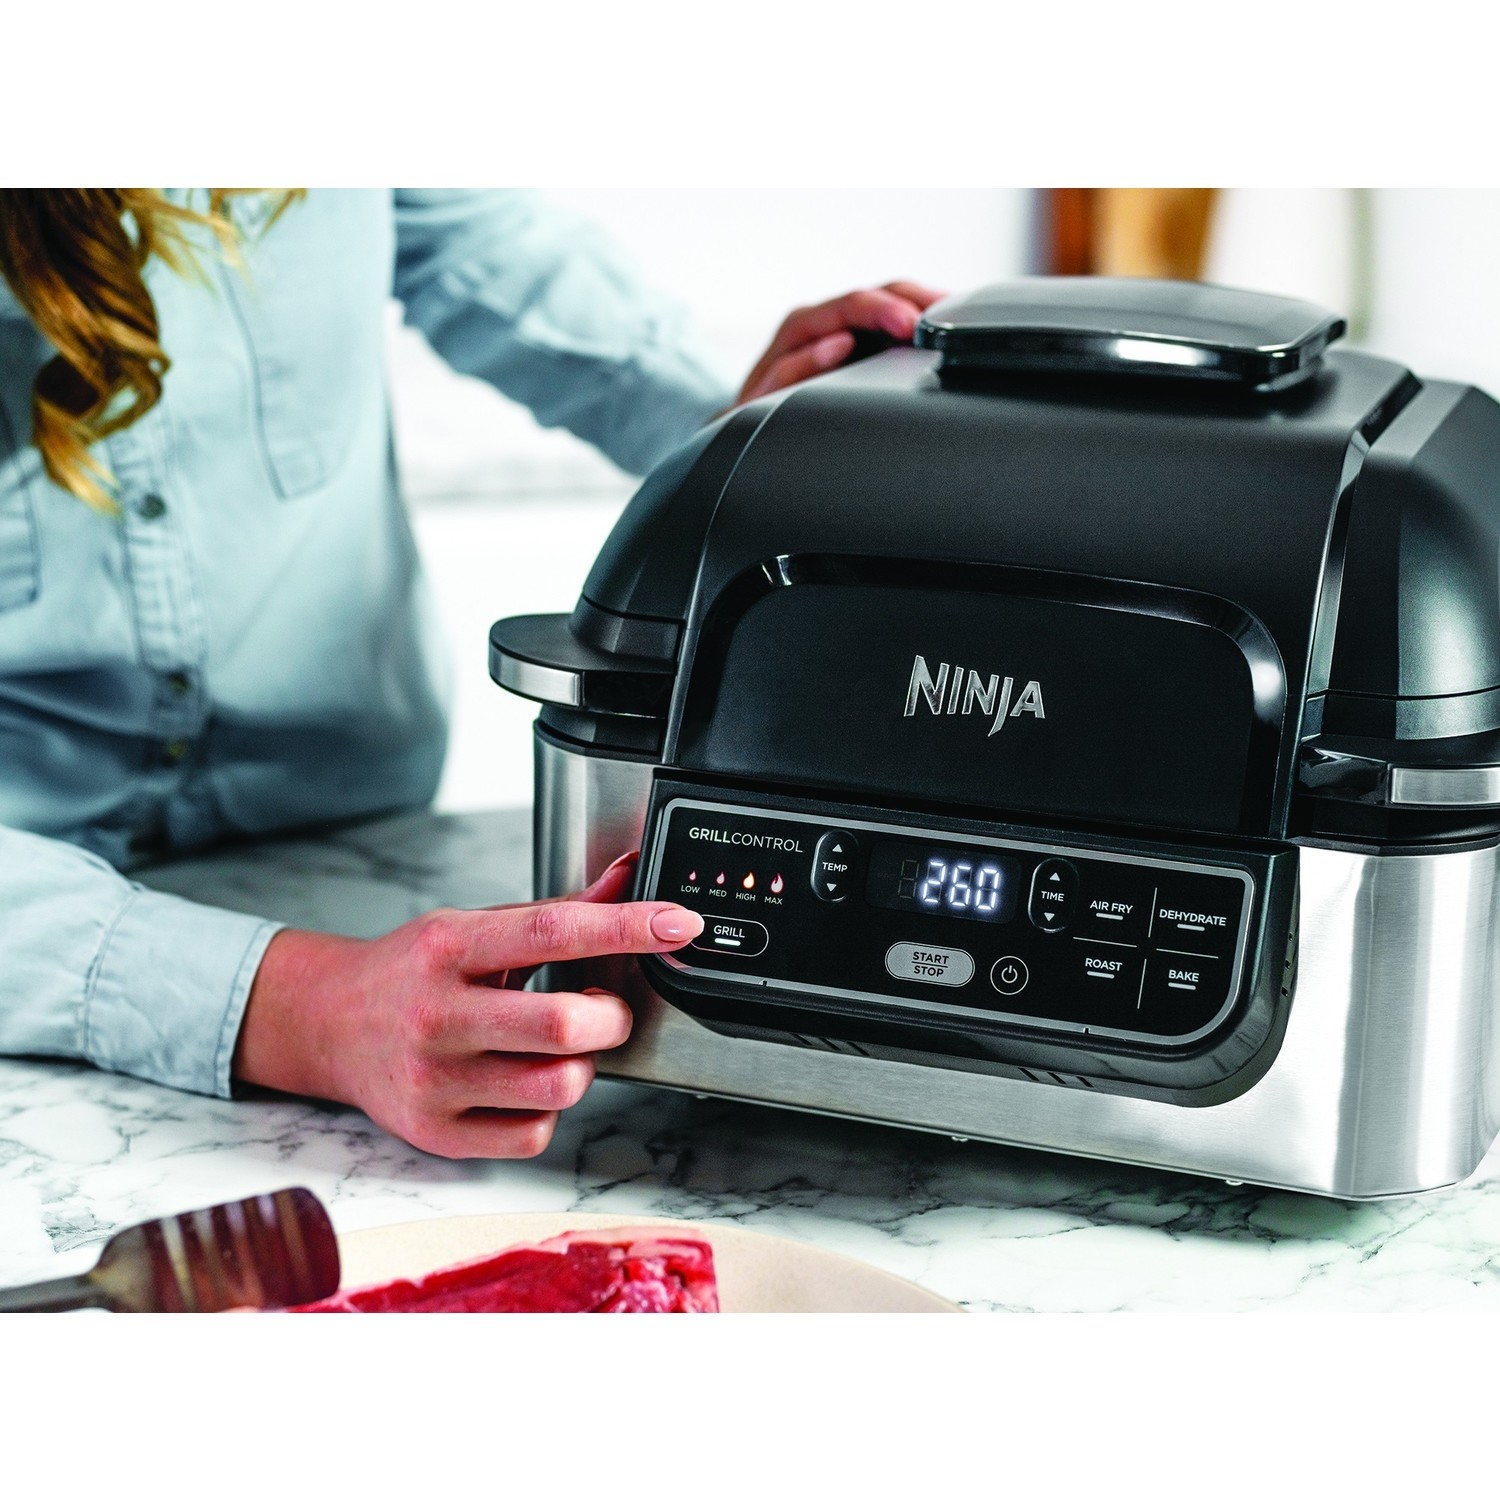 Ninja AG302 Refurbished Foodi 5-in-1 Indoor Grill with Air Fry, Roast, Bake  and